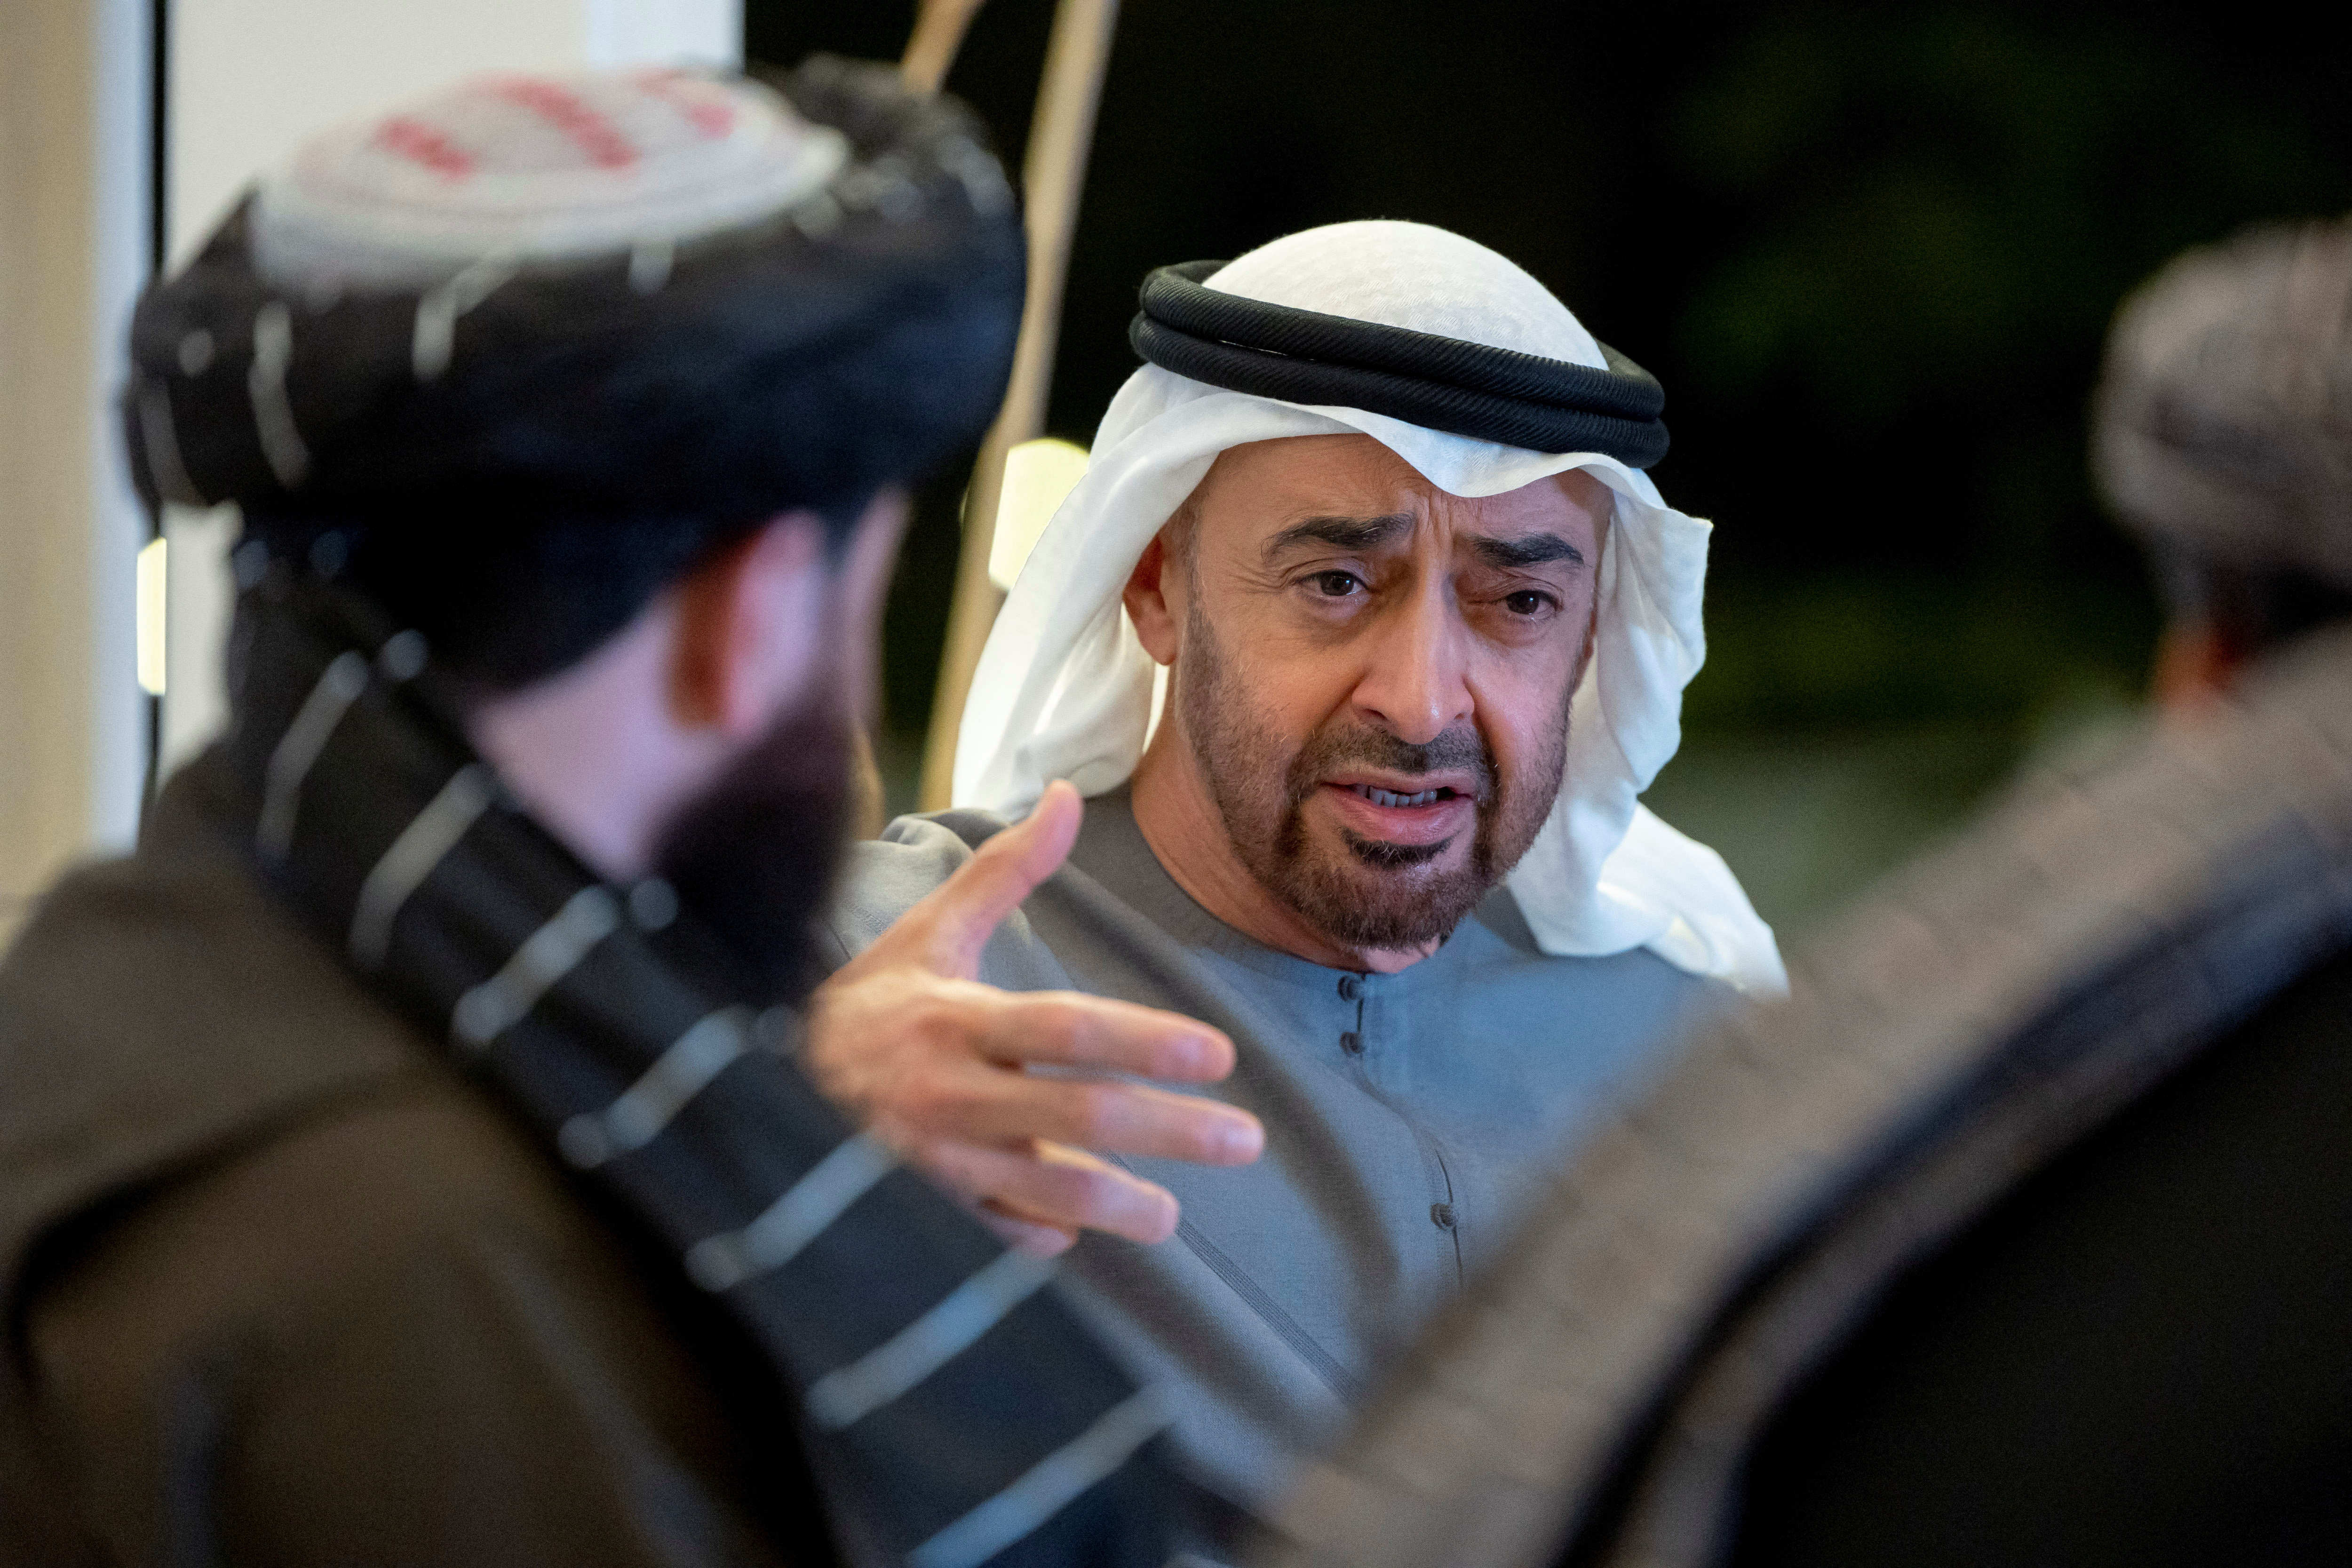 President of the UAE Sheikh Mohamed bin Zayed Al Nahyan meets with Afghanistan's Acting Defence Minister Mullah Mohammad Yaqoob at Al-Shati Palace in Abu Dhabi